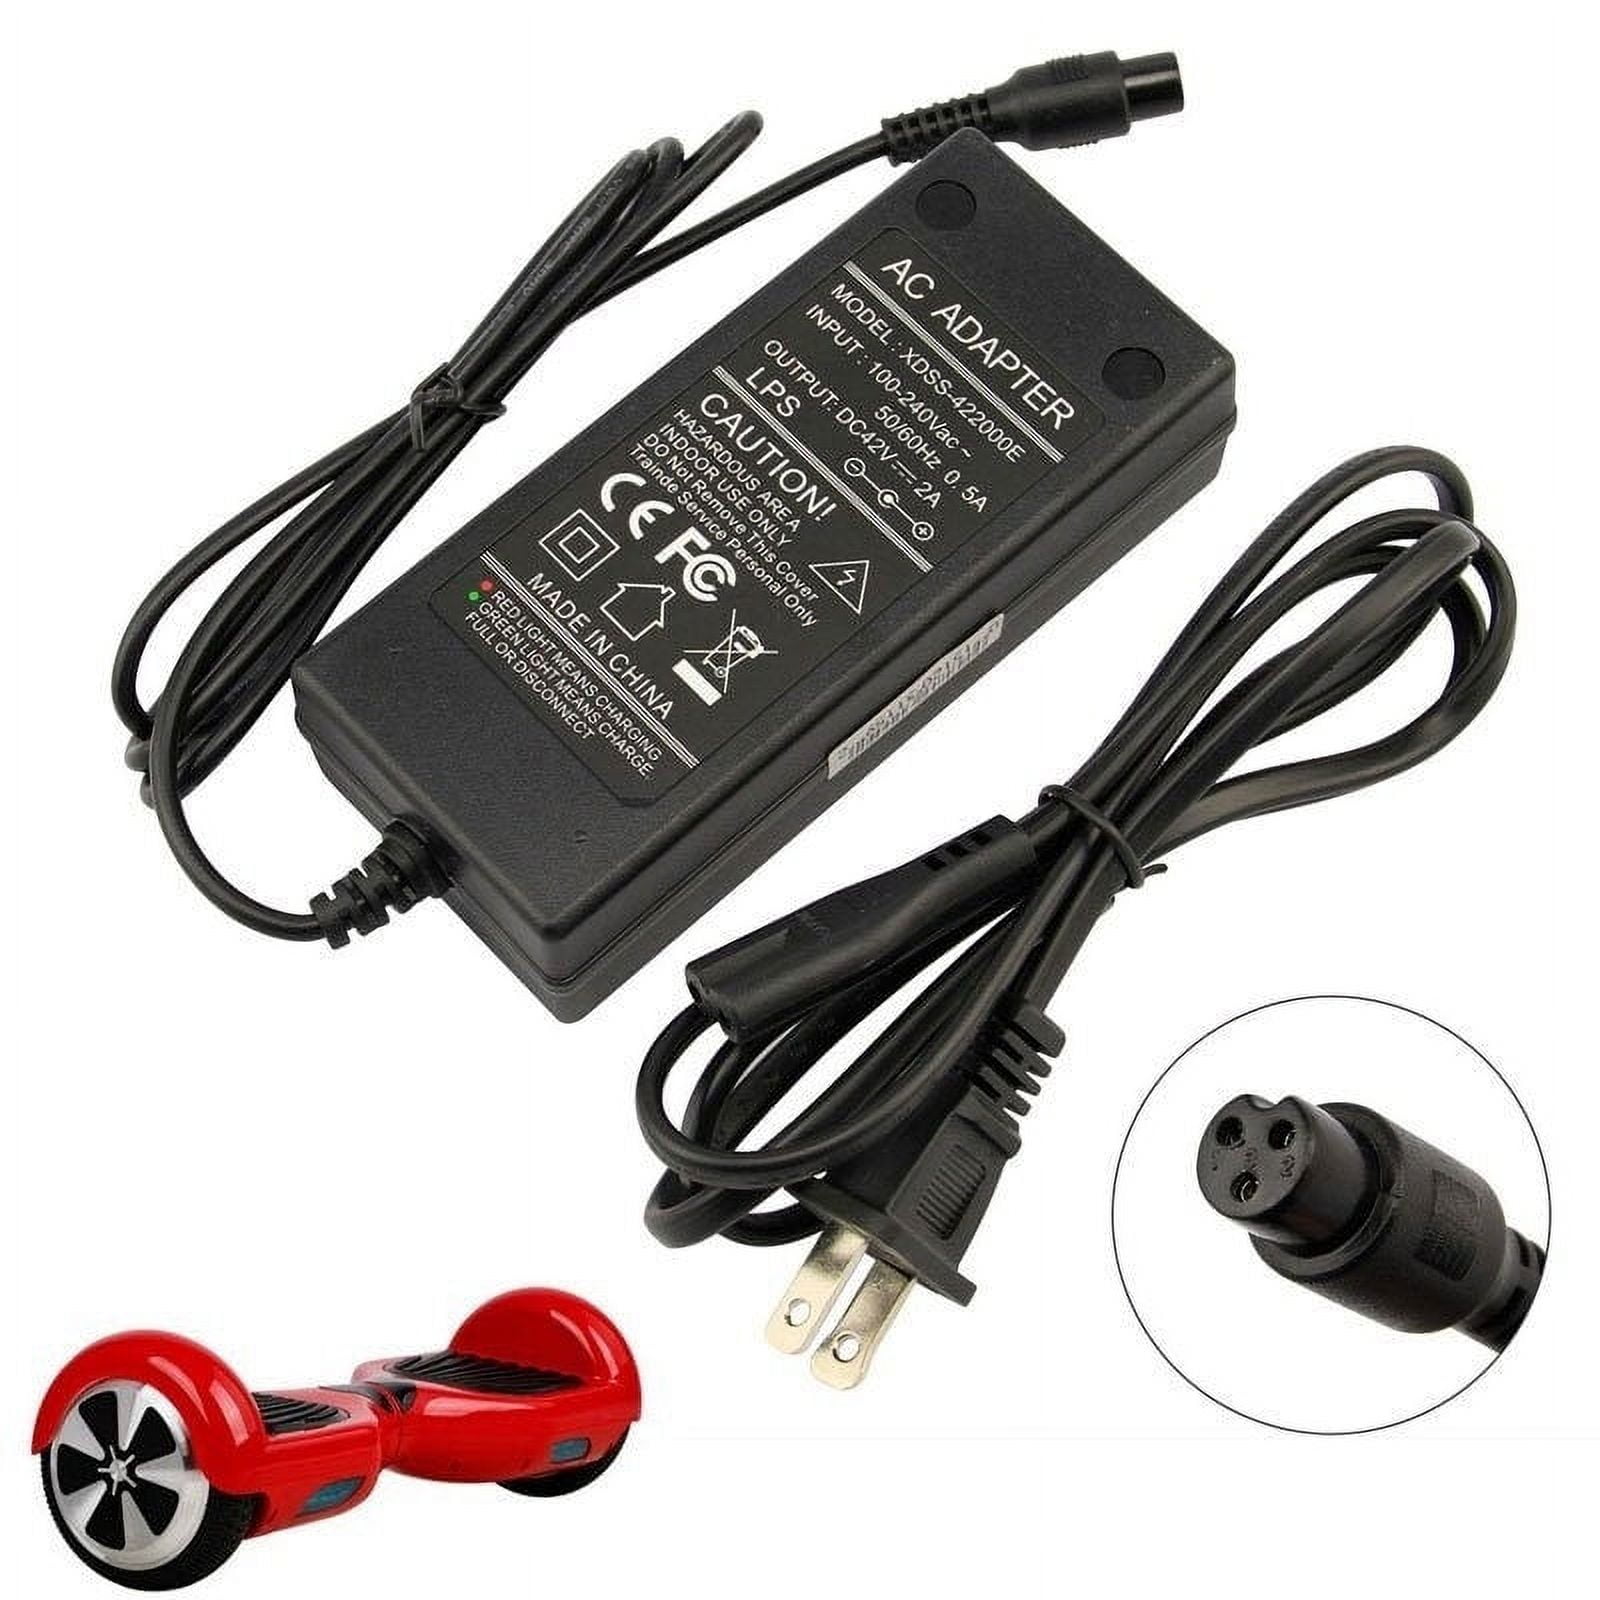 LotFancy 12V 1A Electric Scooter Battery Charger, Power Supply Adapter for  Razor E90, Power Rider 360, Boreem Tankman, Kids Ride On Toys